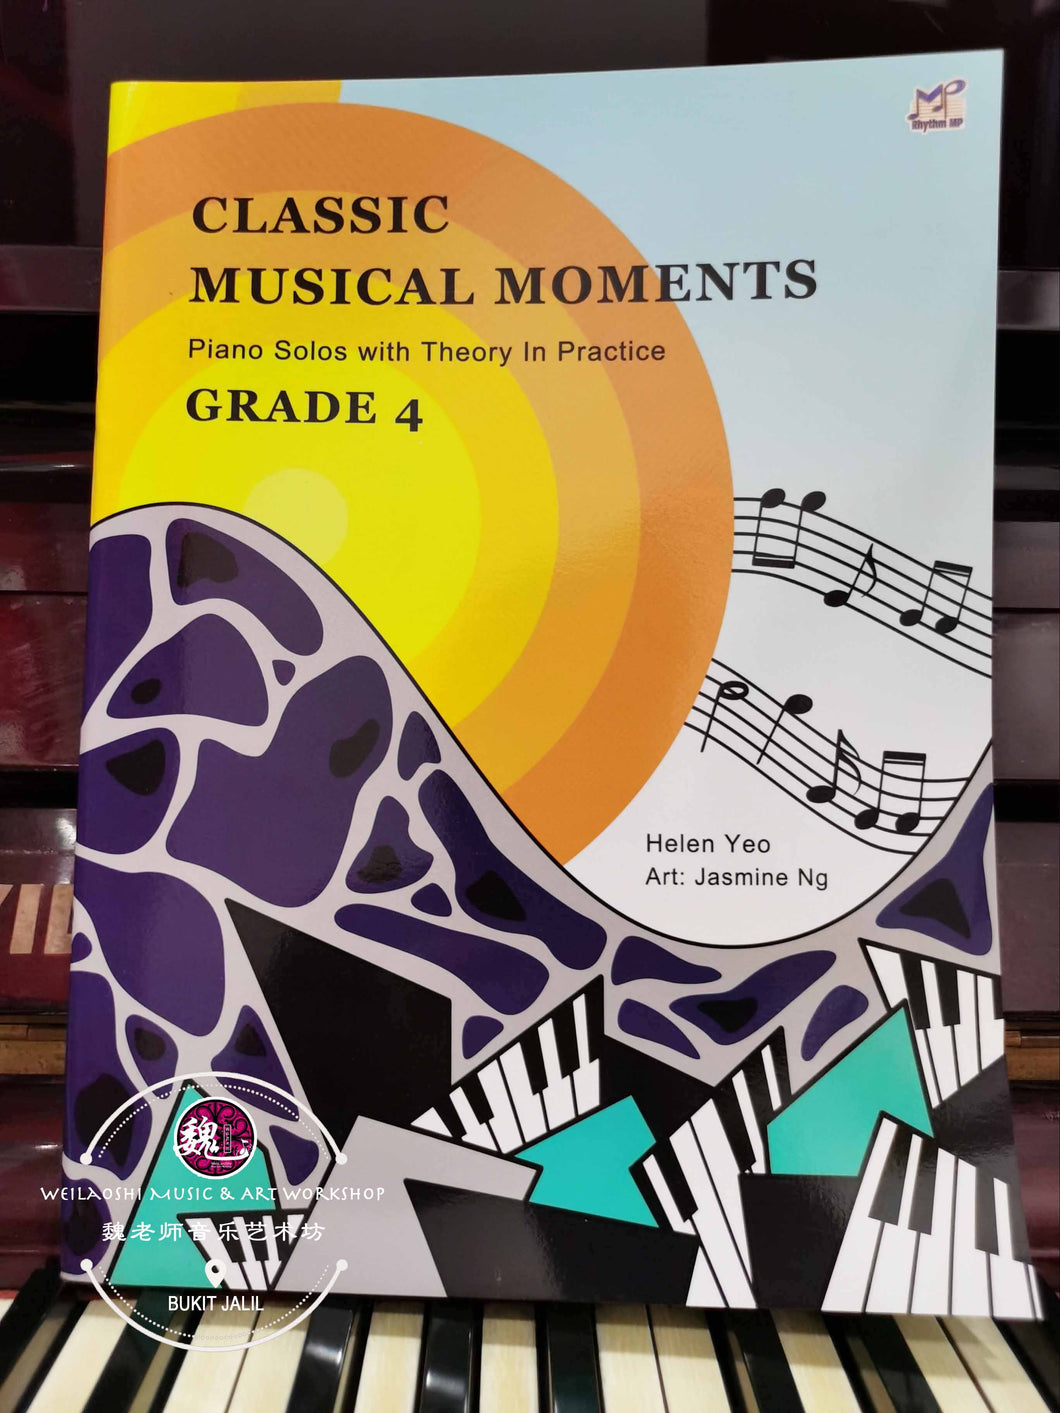 Classic Musical Moments Grade 4 Piano Solos with Theory in Practice by Helen Yeo